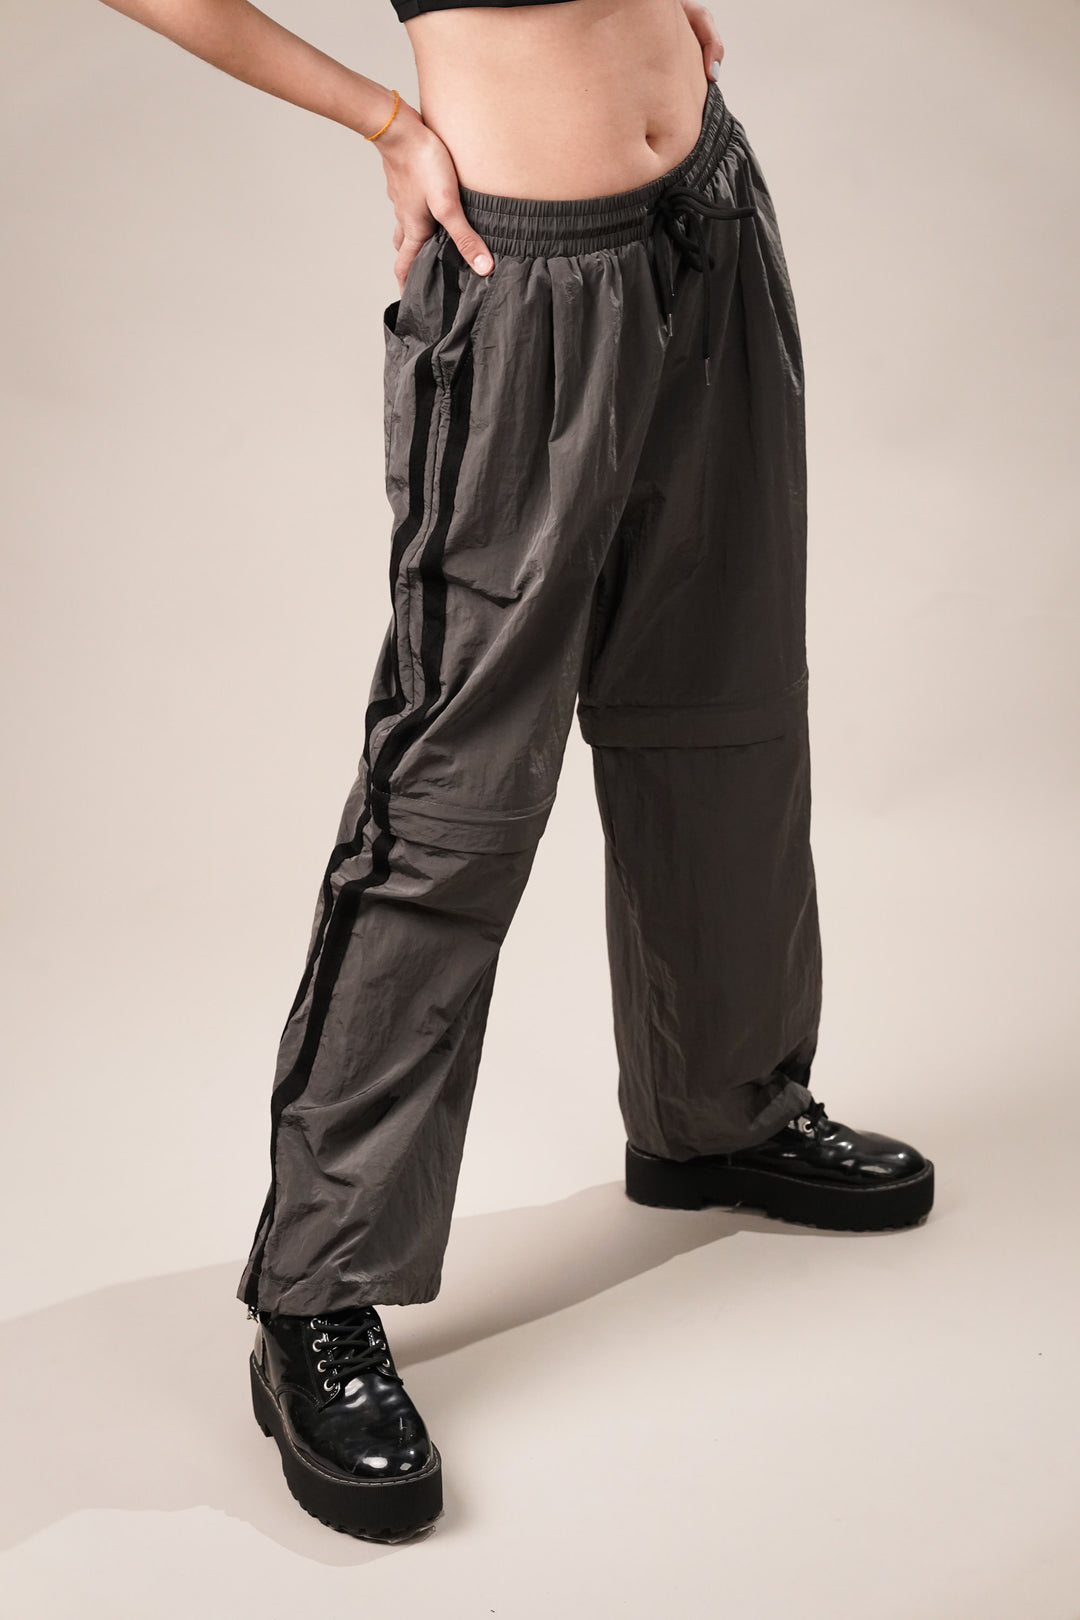 relaxed fit polyester blend bottoms